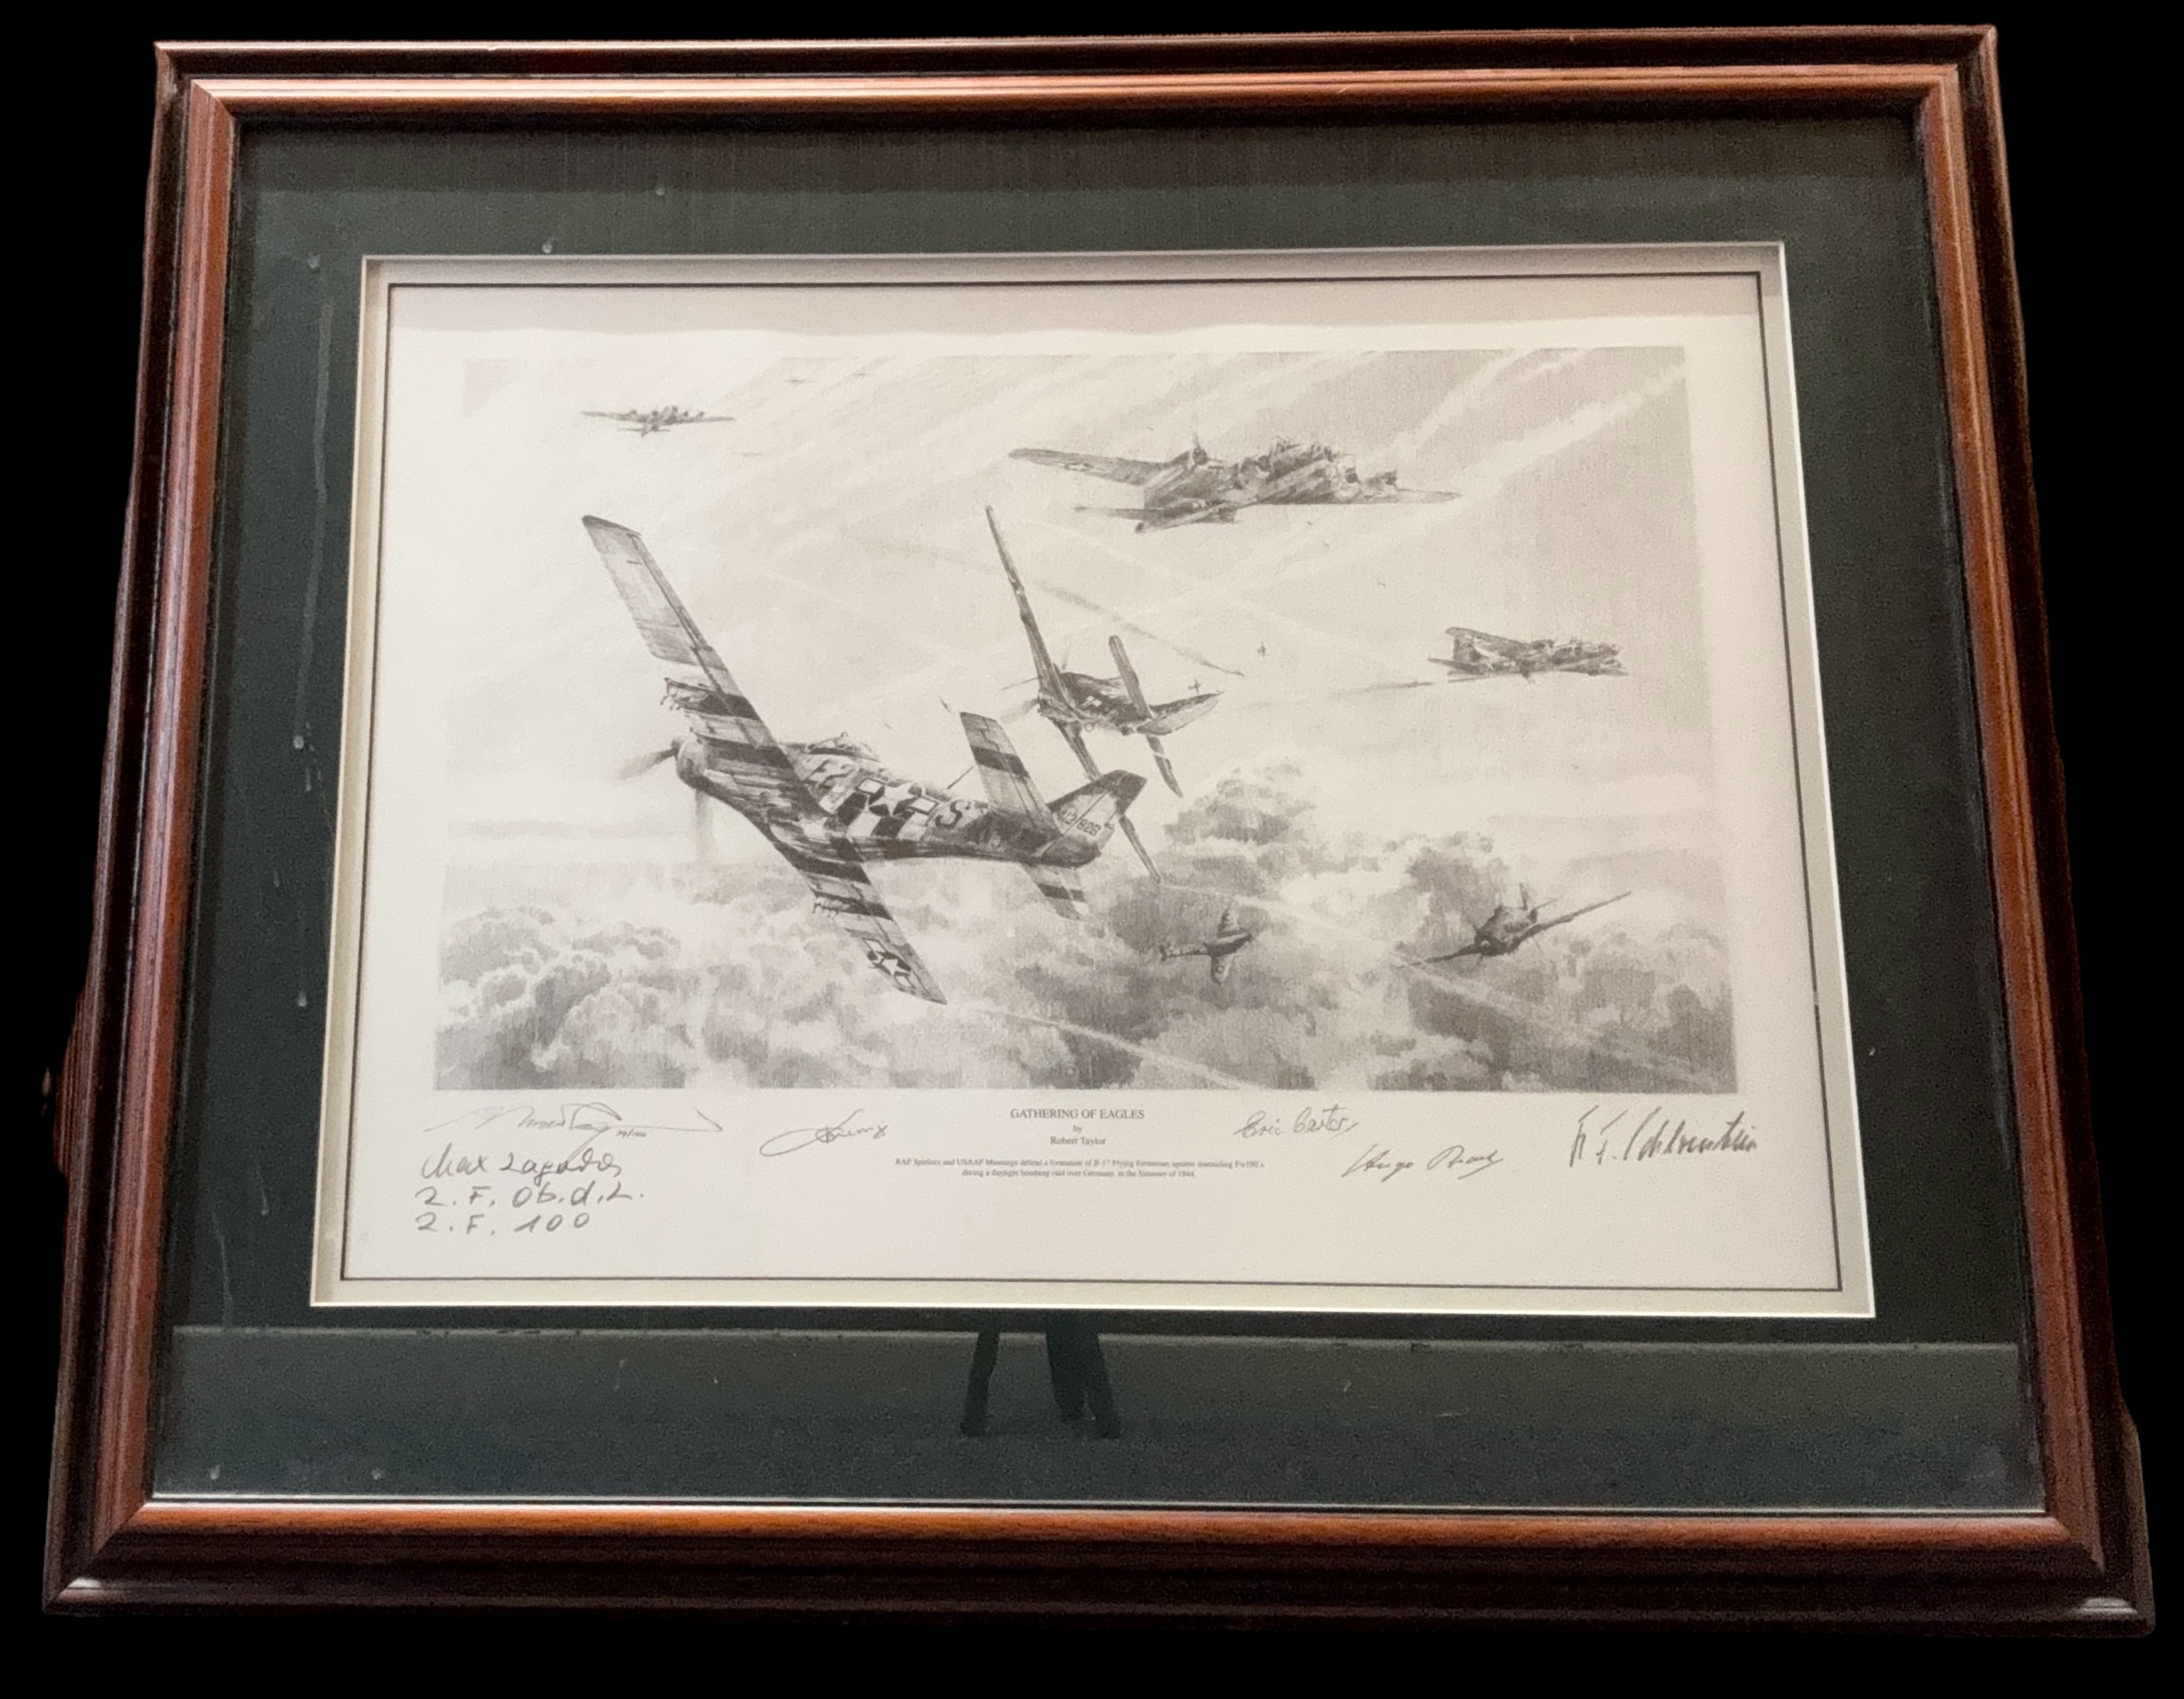 Gathering of Eagles Aces High Edition WWII multi signed 31x25 mounted and framed print 5, signatures - Image 2 of 3